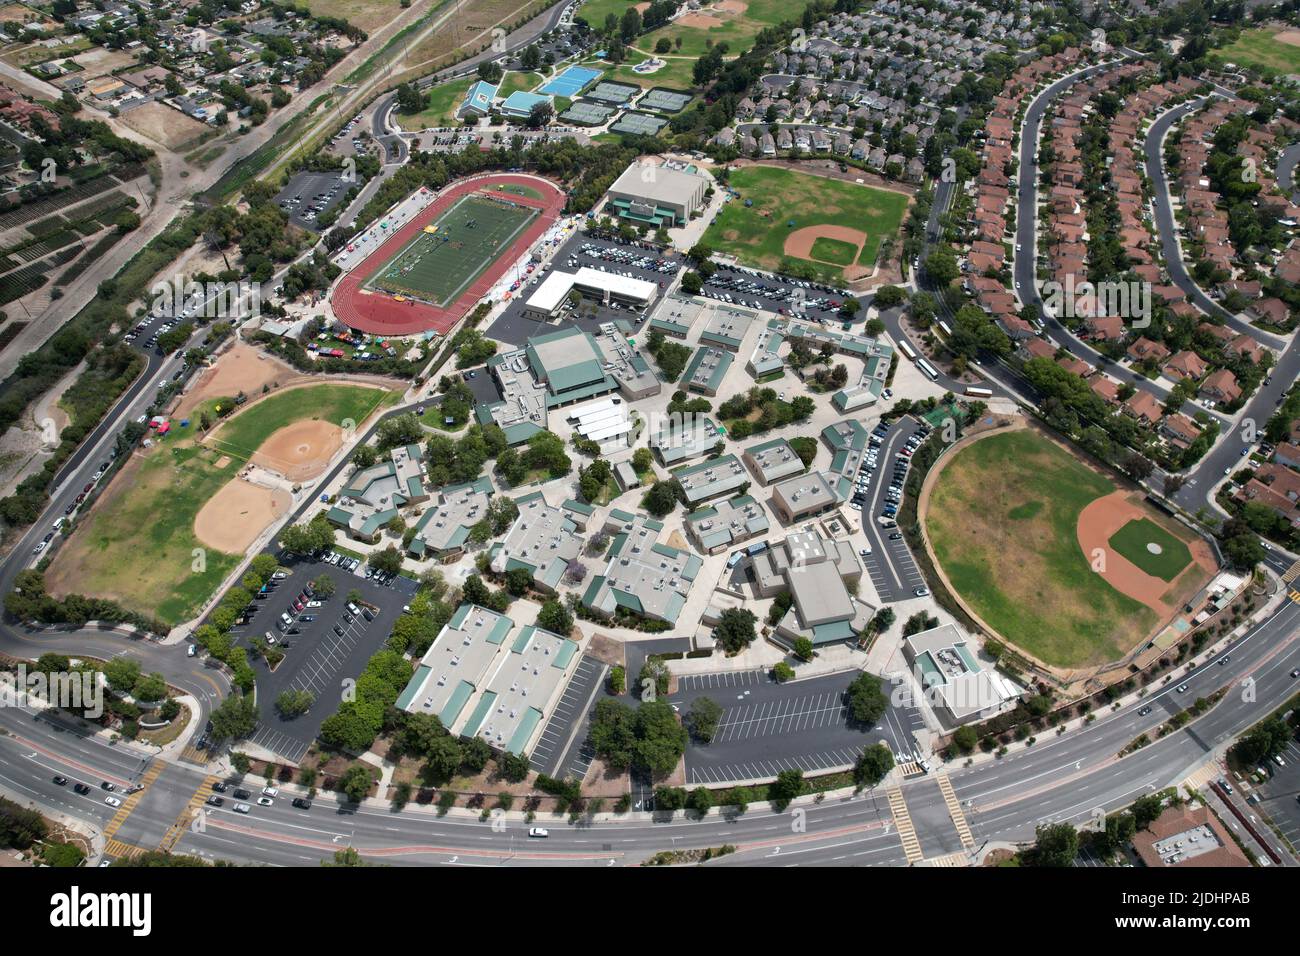 A general overall aerial view of the Moorpark High School campus and